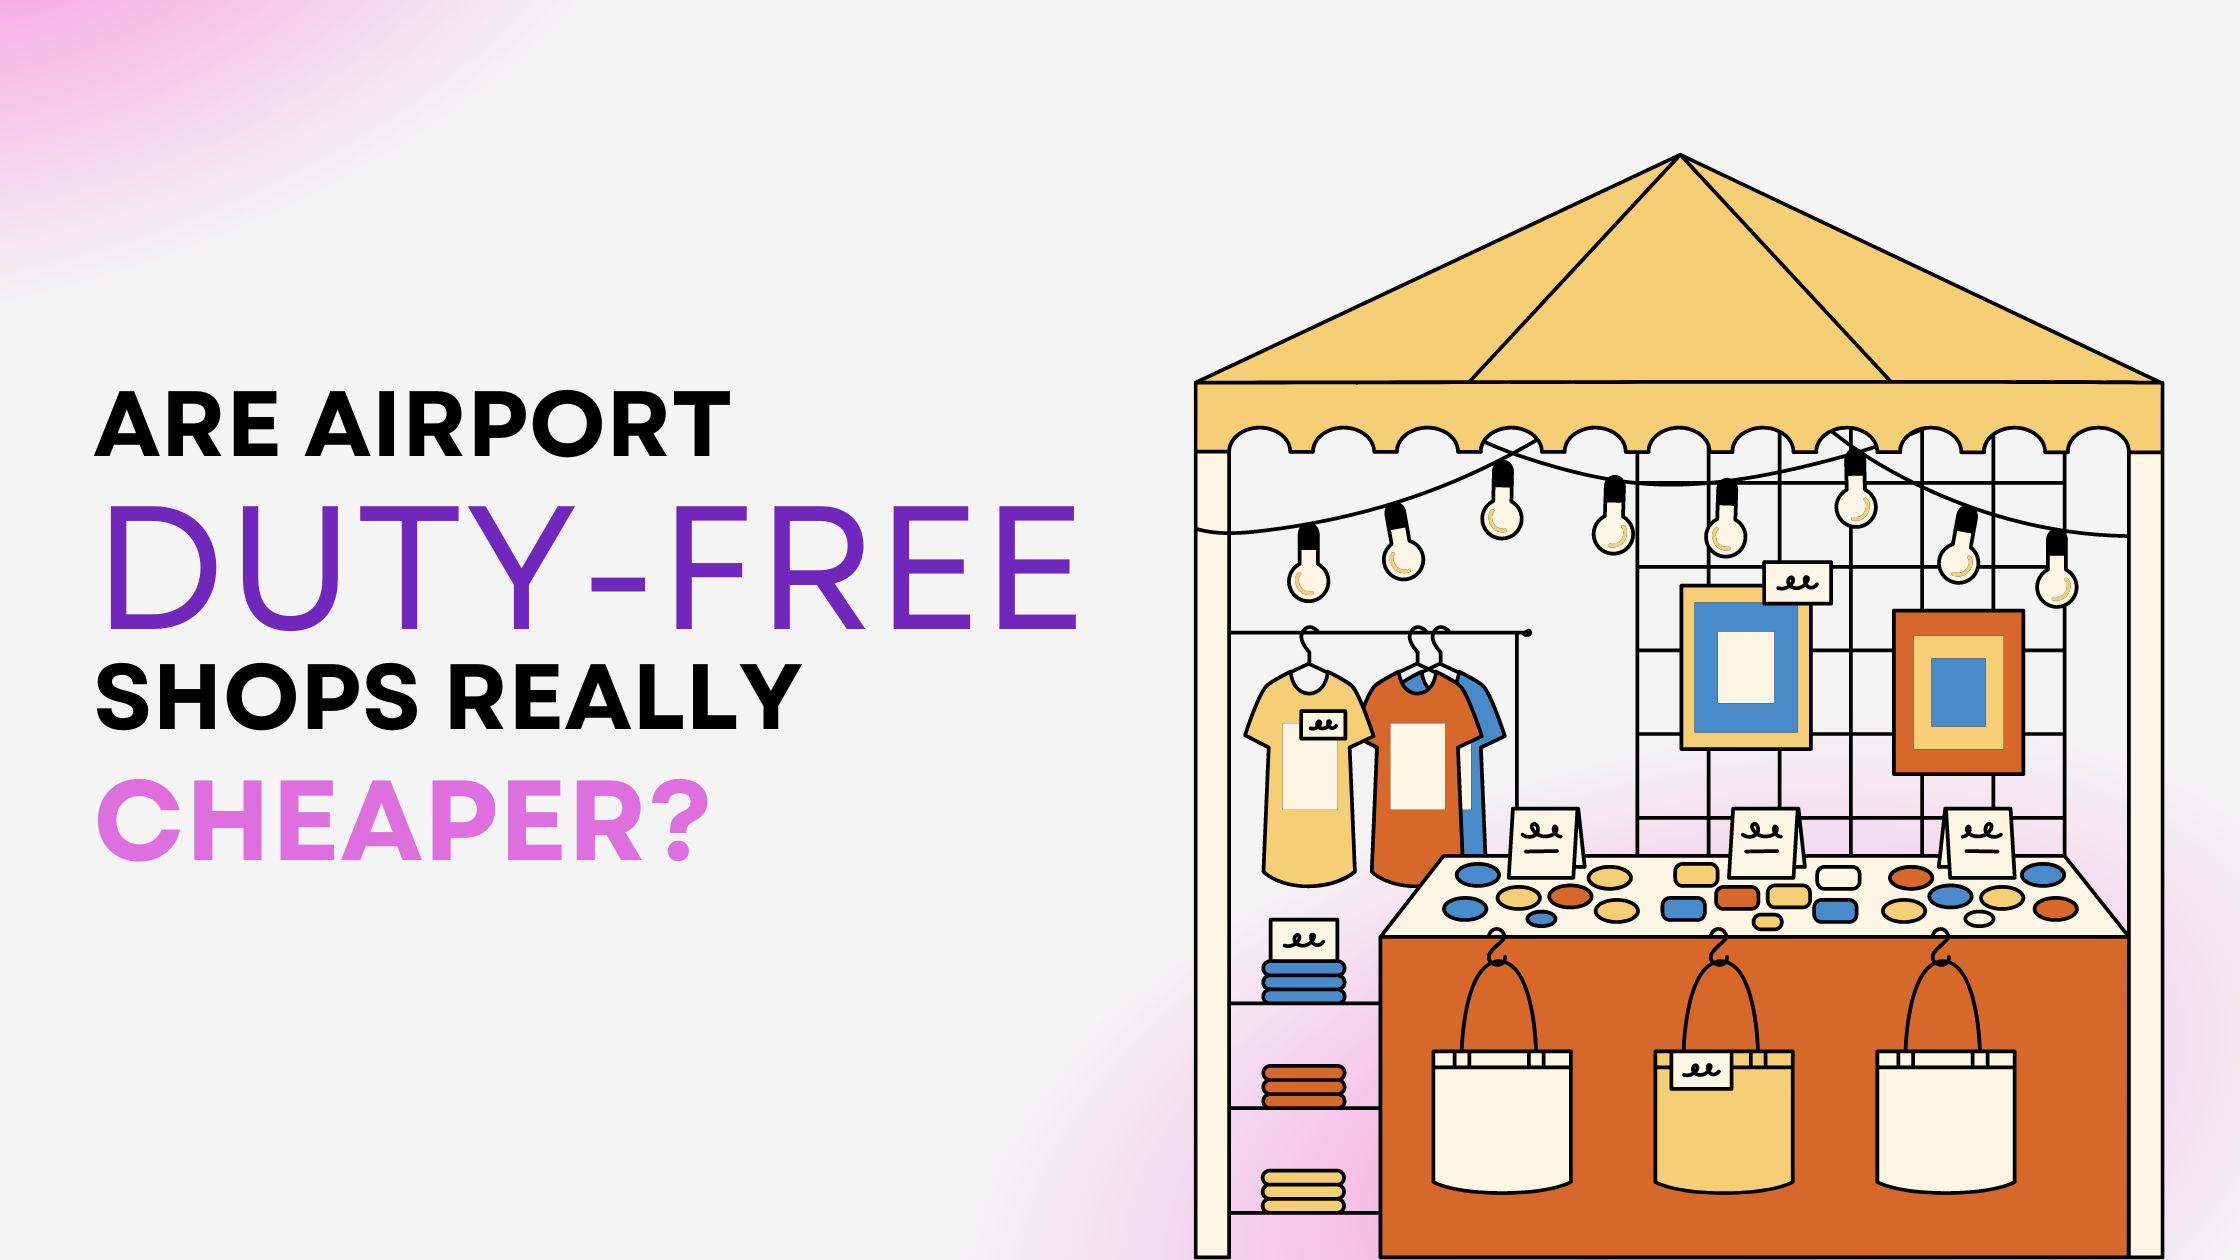 Are Airport Duty-Free Shops Really Cheaper